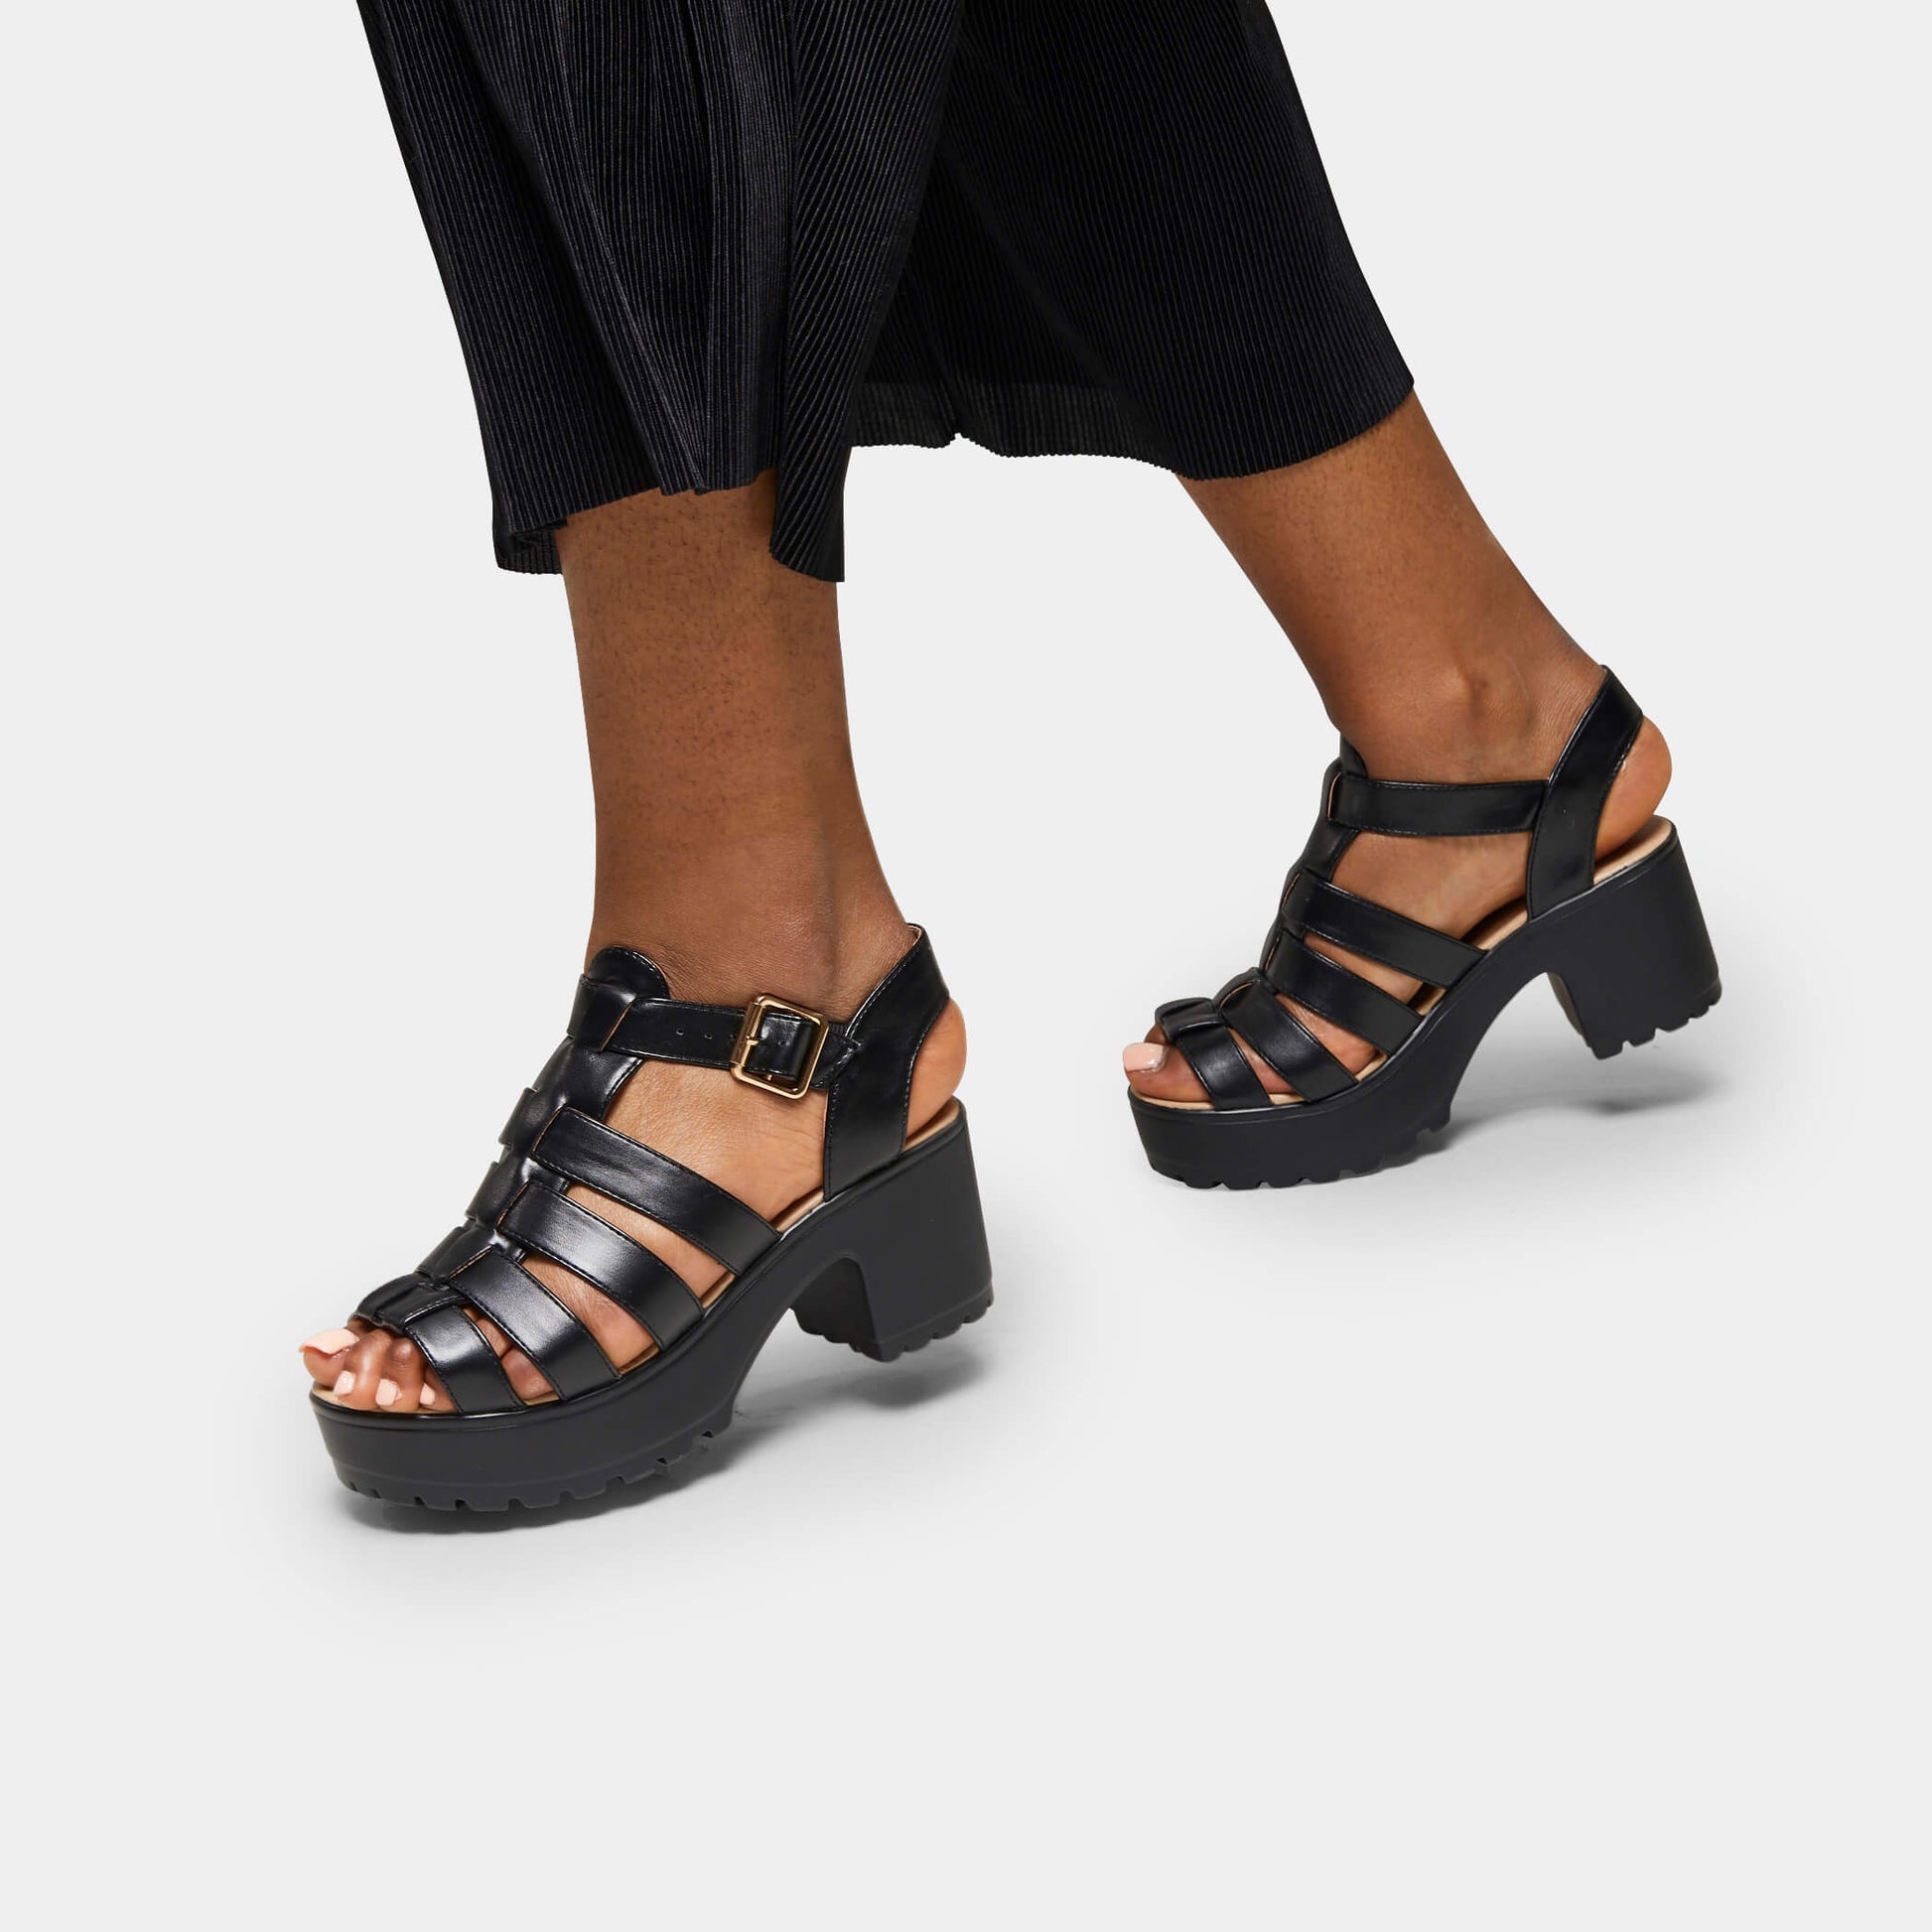 SII Black Strappy Cleated Sandals - Sandals - KOI Footwear - Black - Model Left View